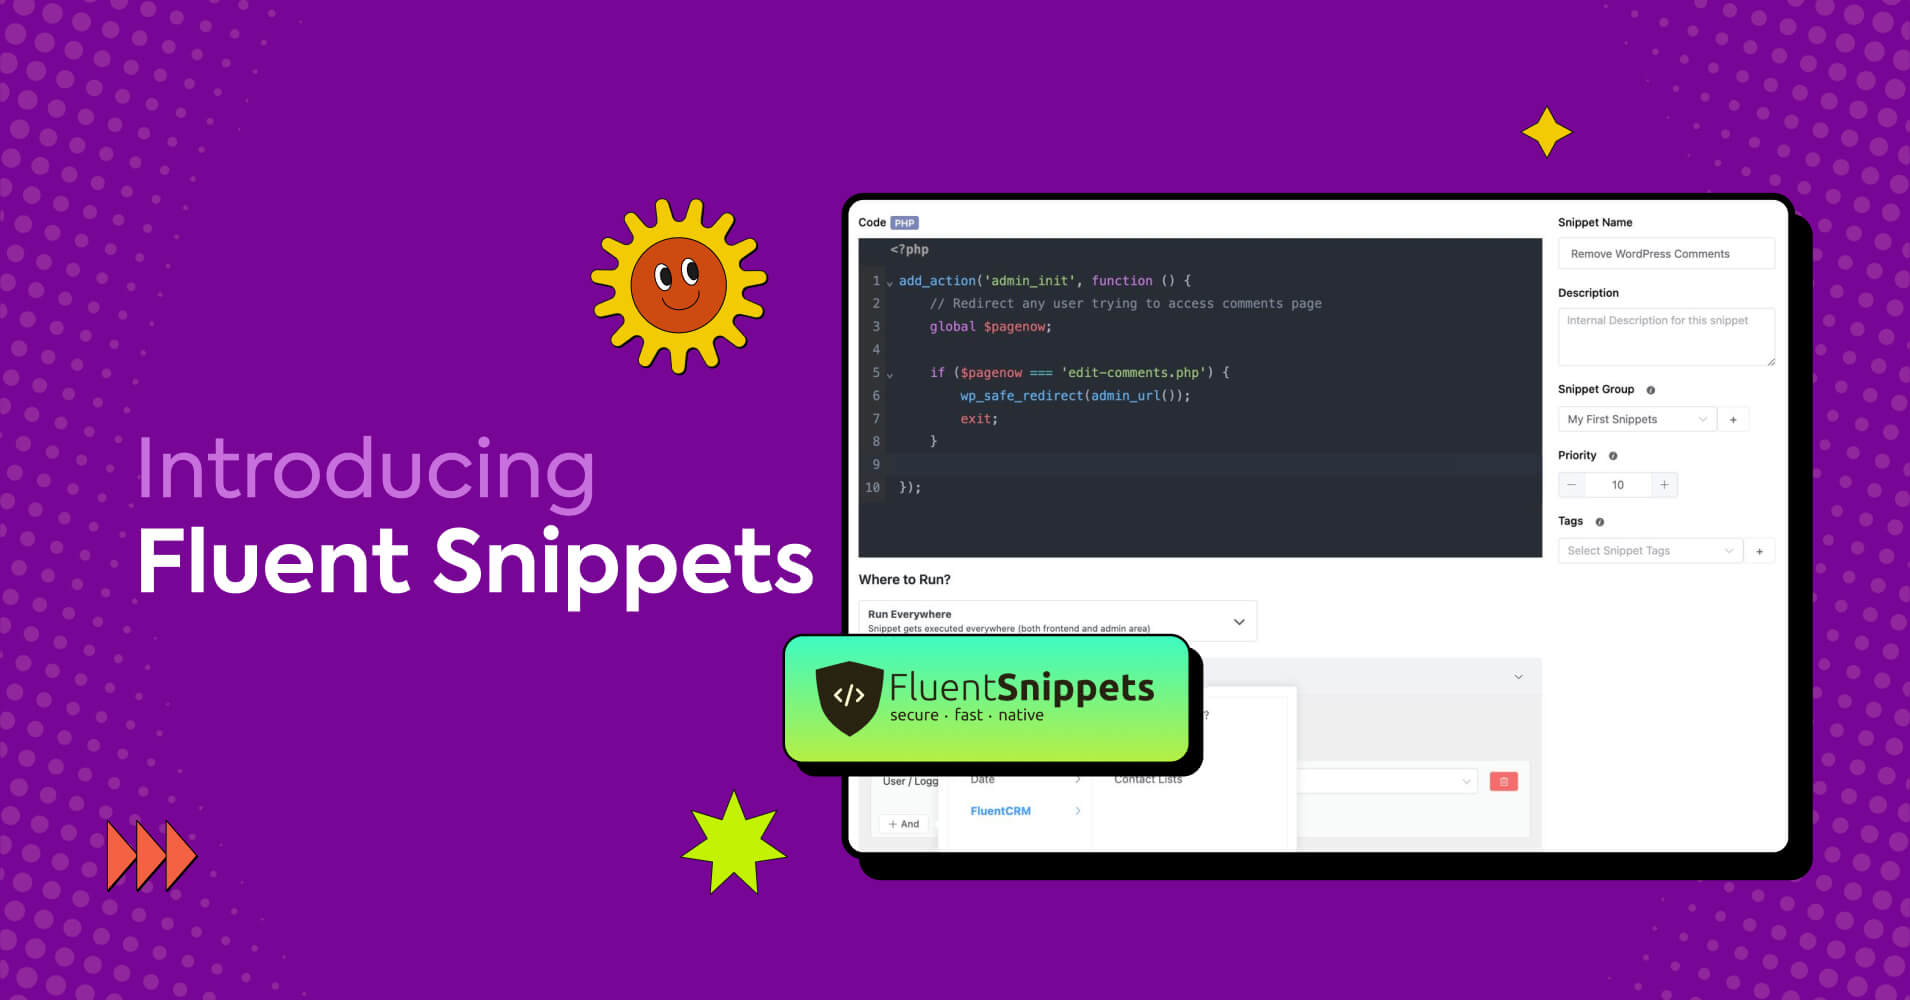 Let’s Welcome FluentSnippets: A Secure, Fast, Native Plugin to Add Custom Codes to Your WordPress Site